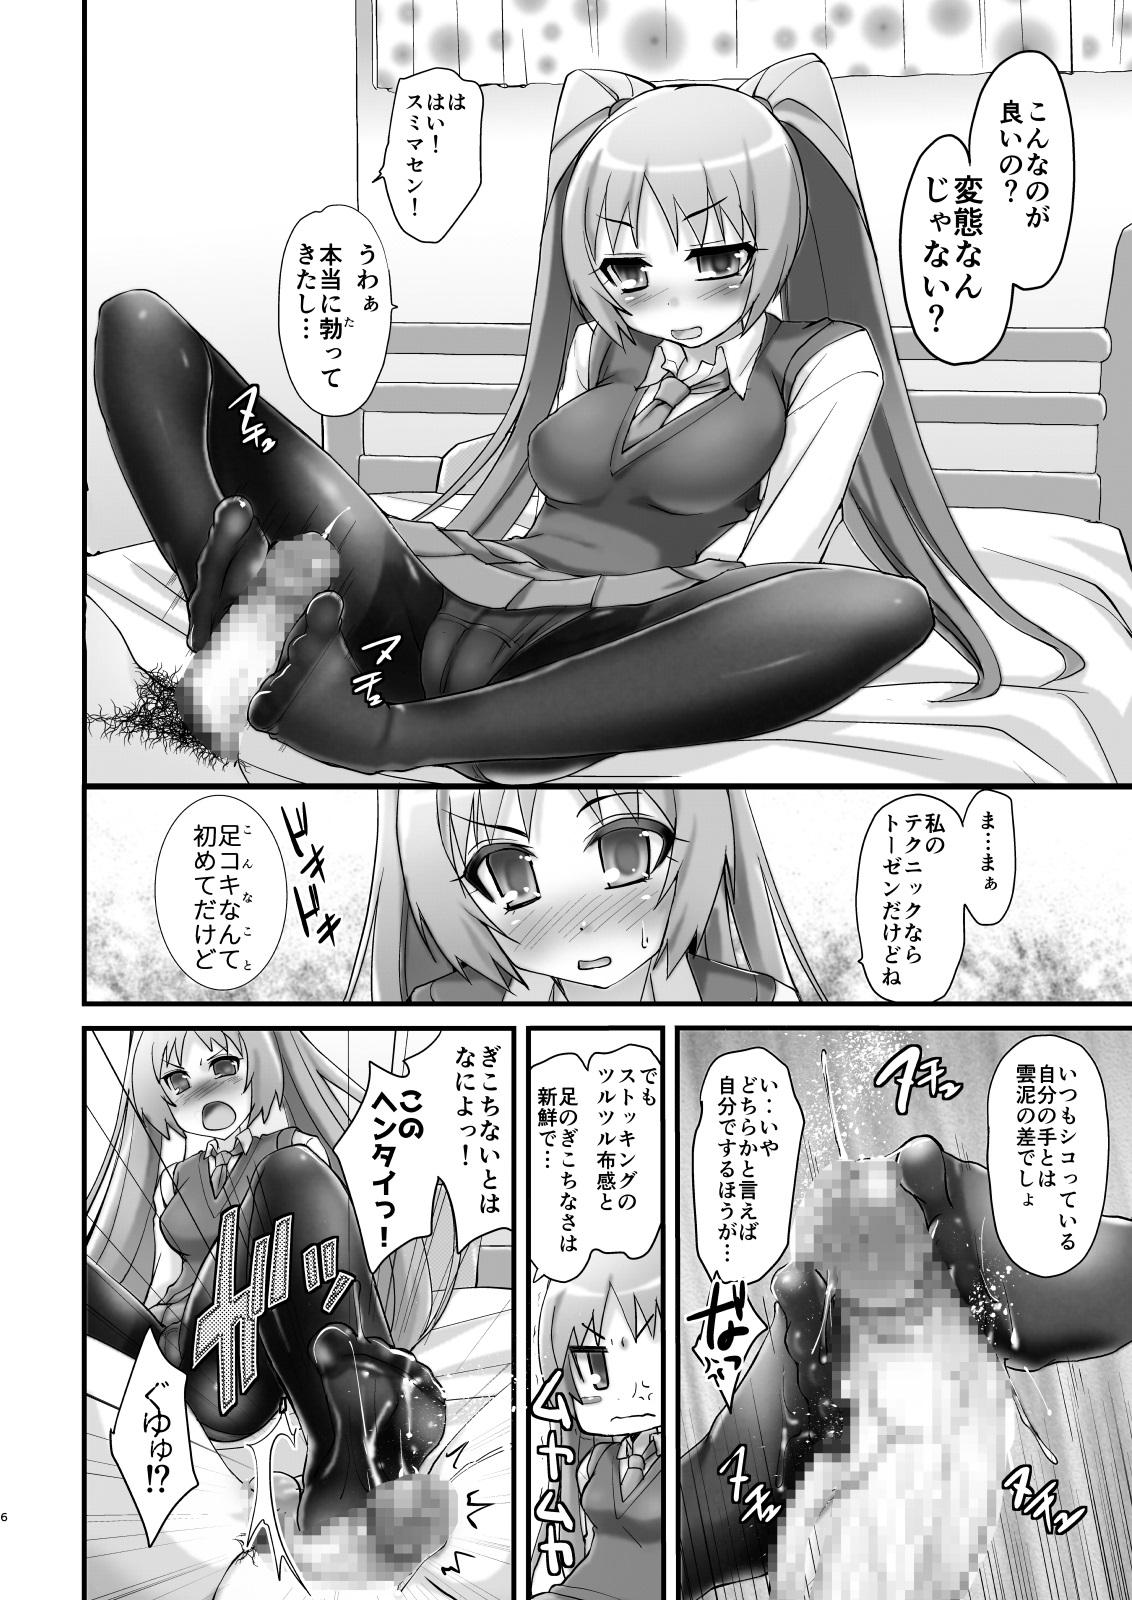 Girl Tsundere Tights to Twintails - Original Futa - Page 6